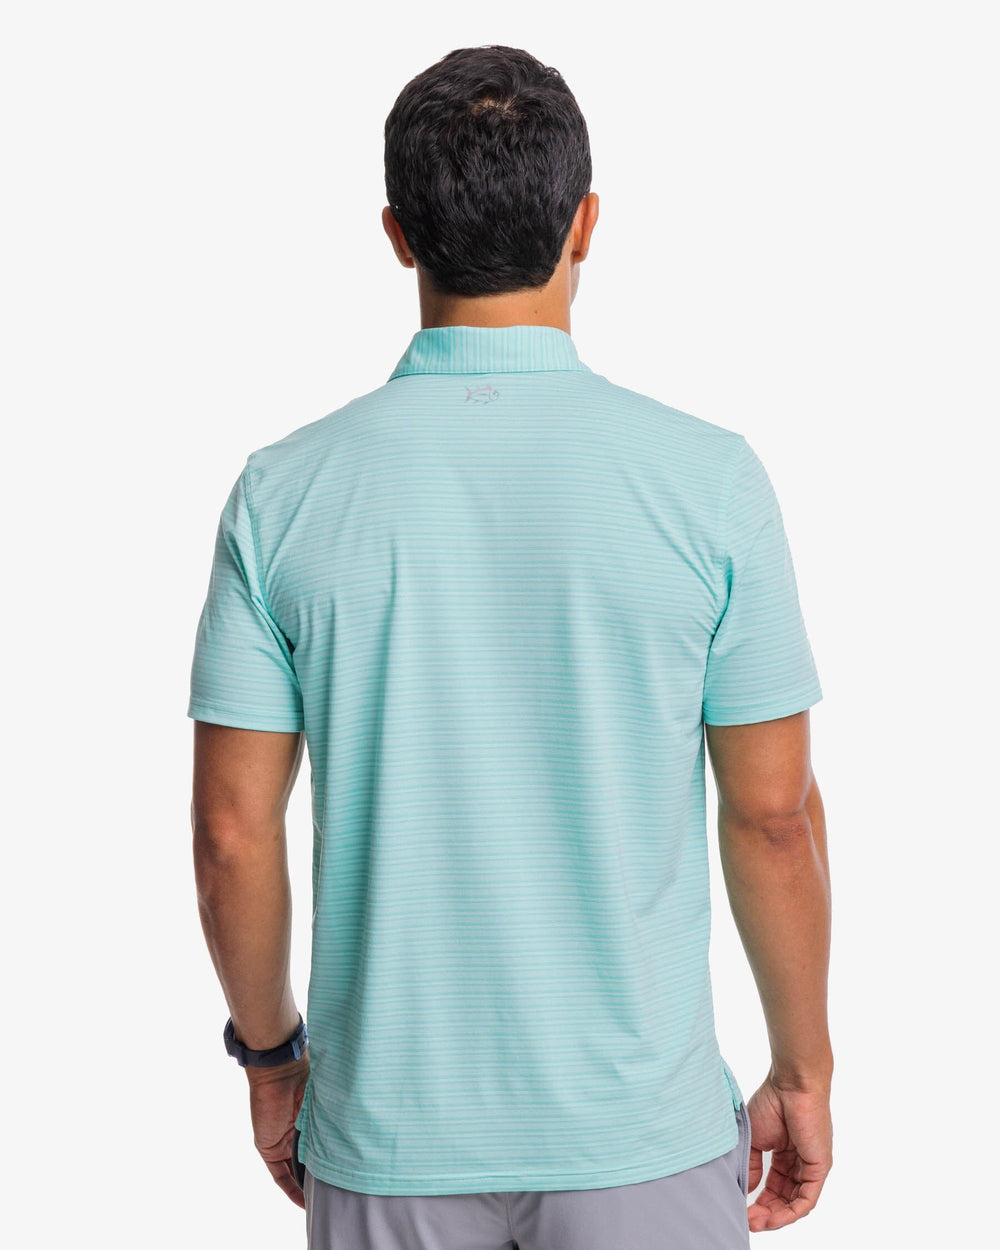 The back view of the Southern Tide brrr°®-eeze Bowen Stripe Performance Polo Shirt by Southern Tide - Mint